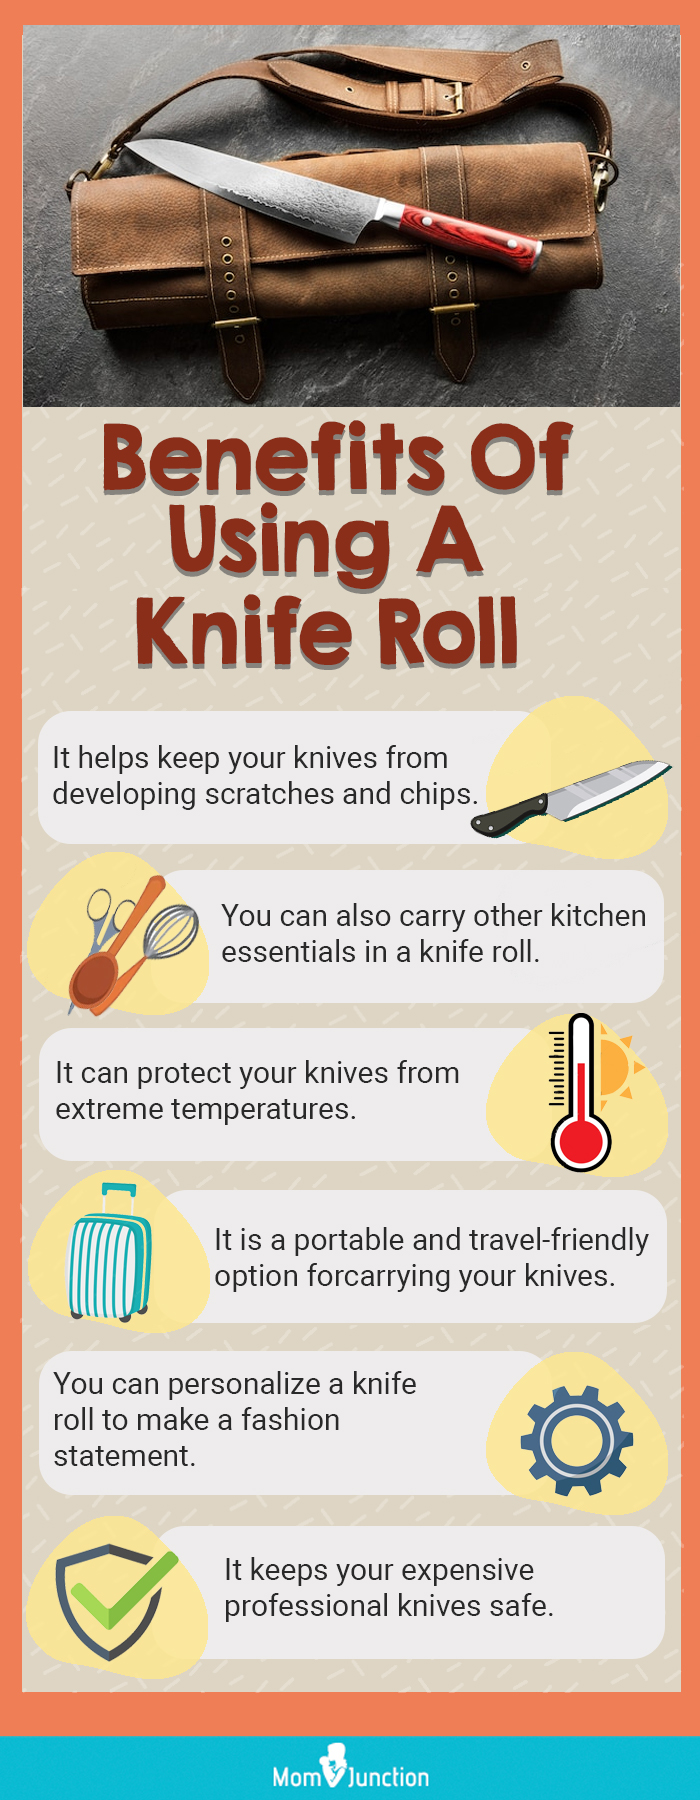 Benefits Of Using A Knife Roll